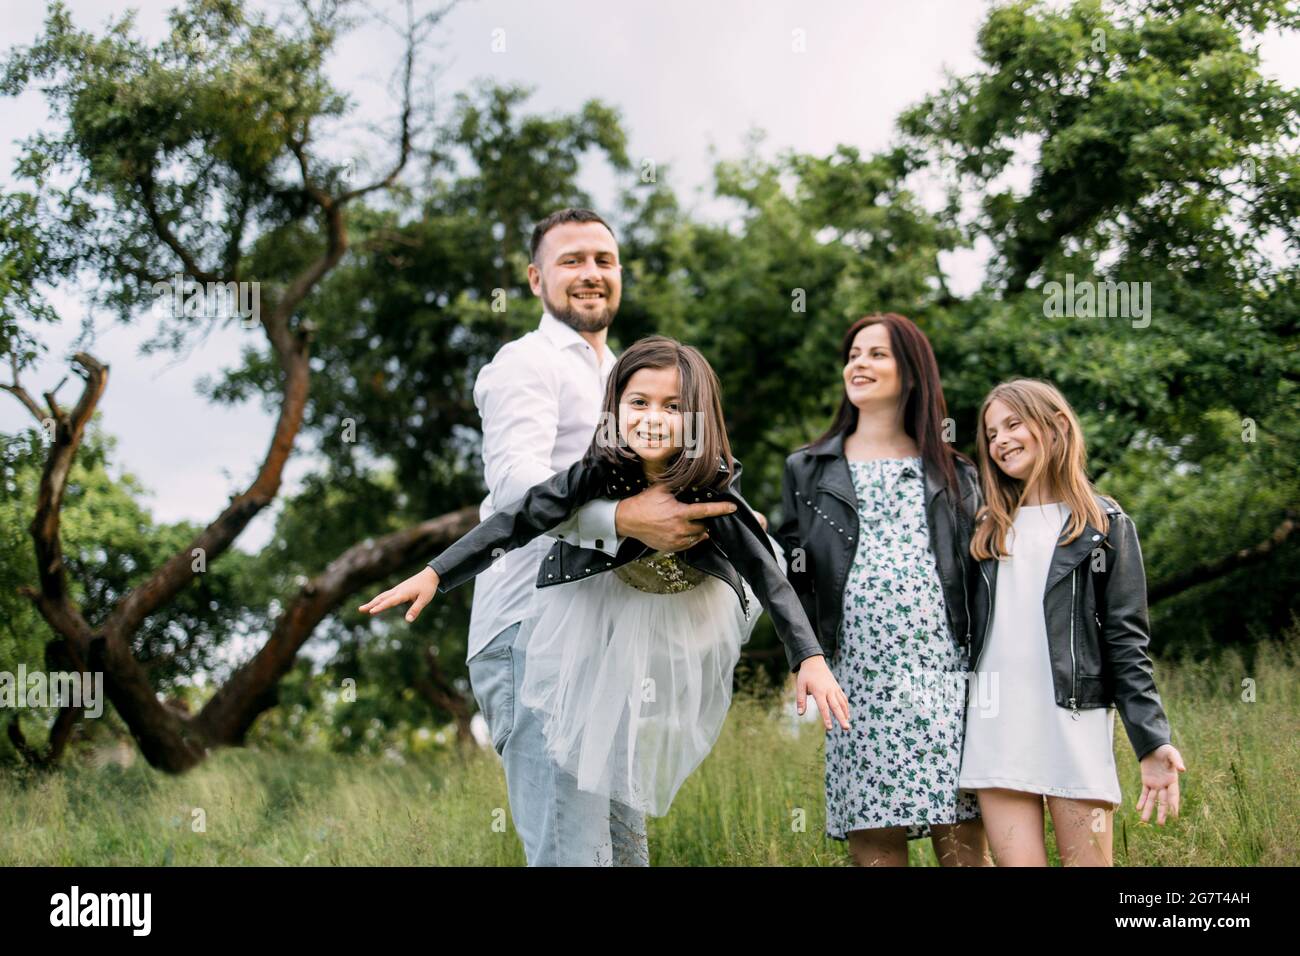 Dad and Daughters Delight in Creating Creative Family Photos